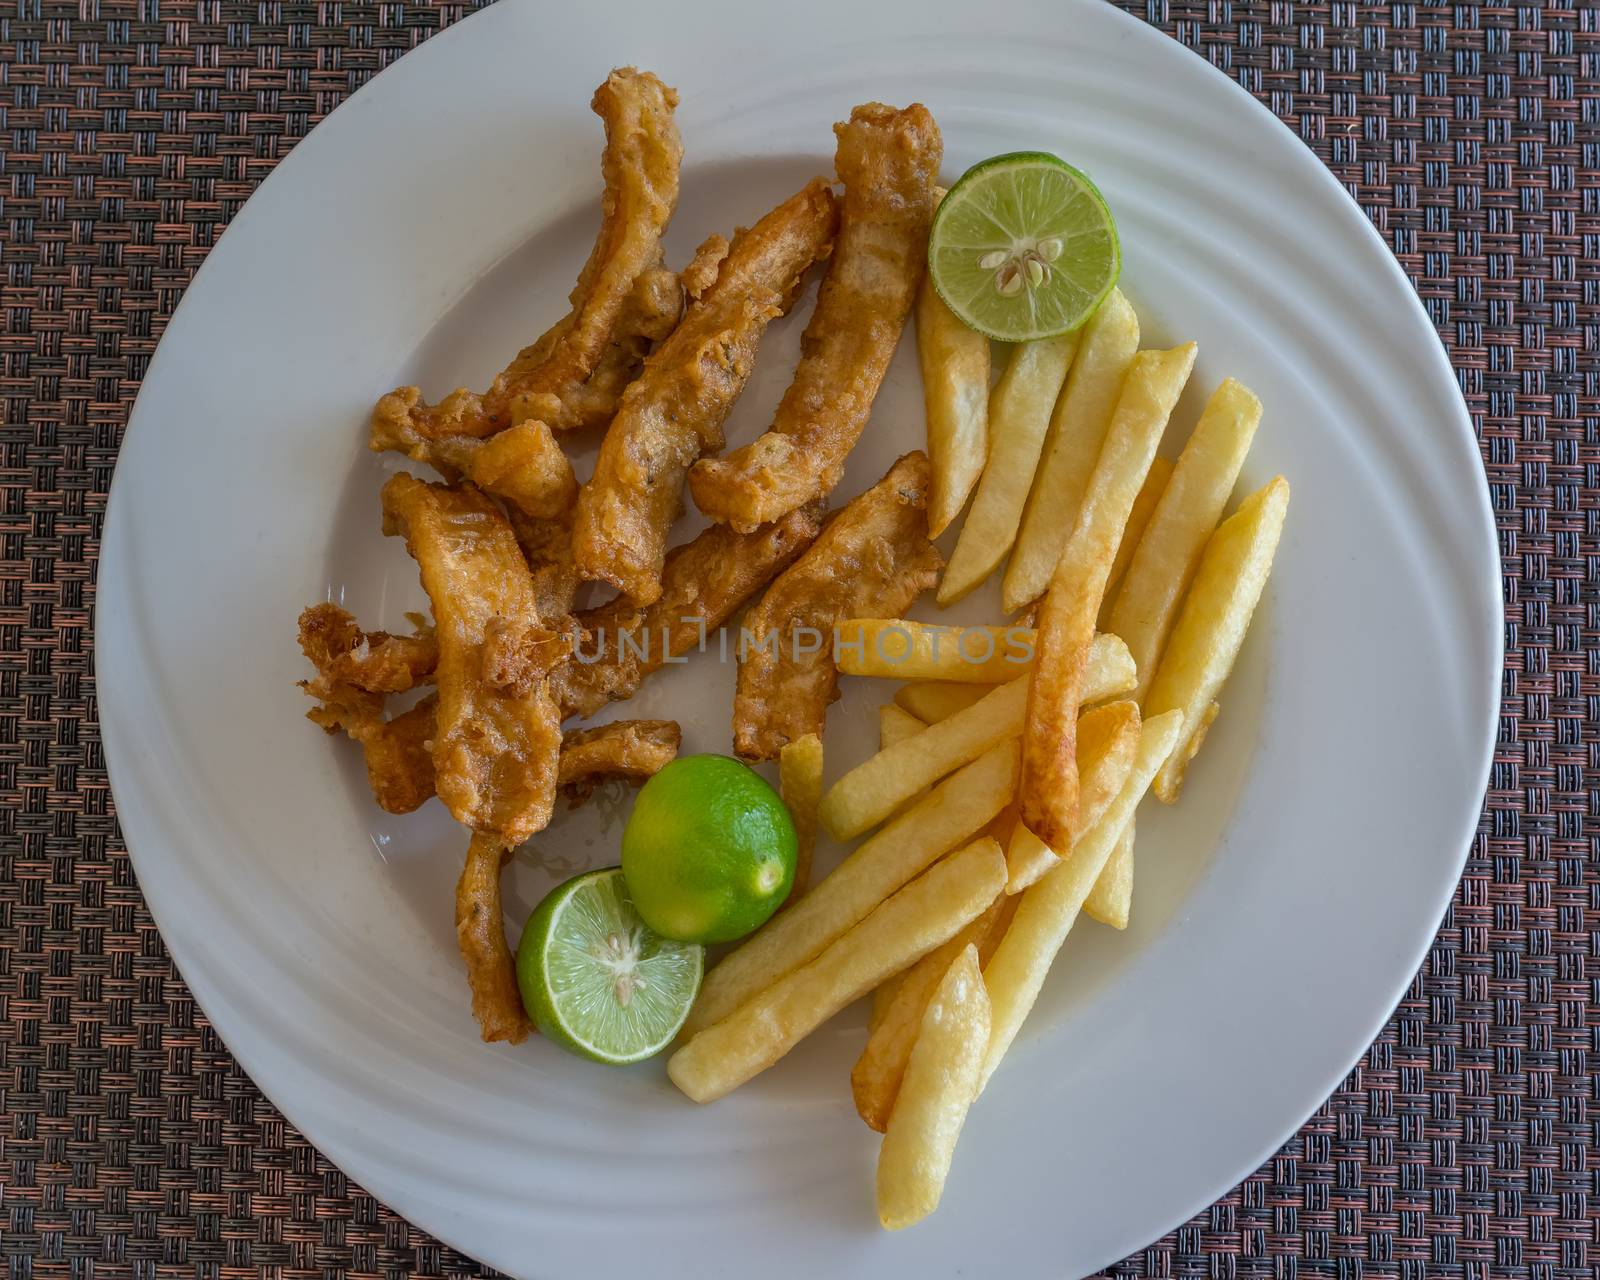 In the photo fried calamari served with fries and three lime as a garnish